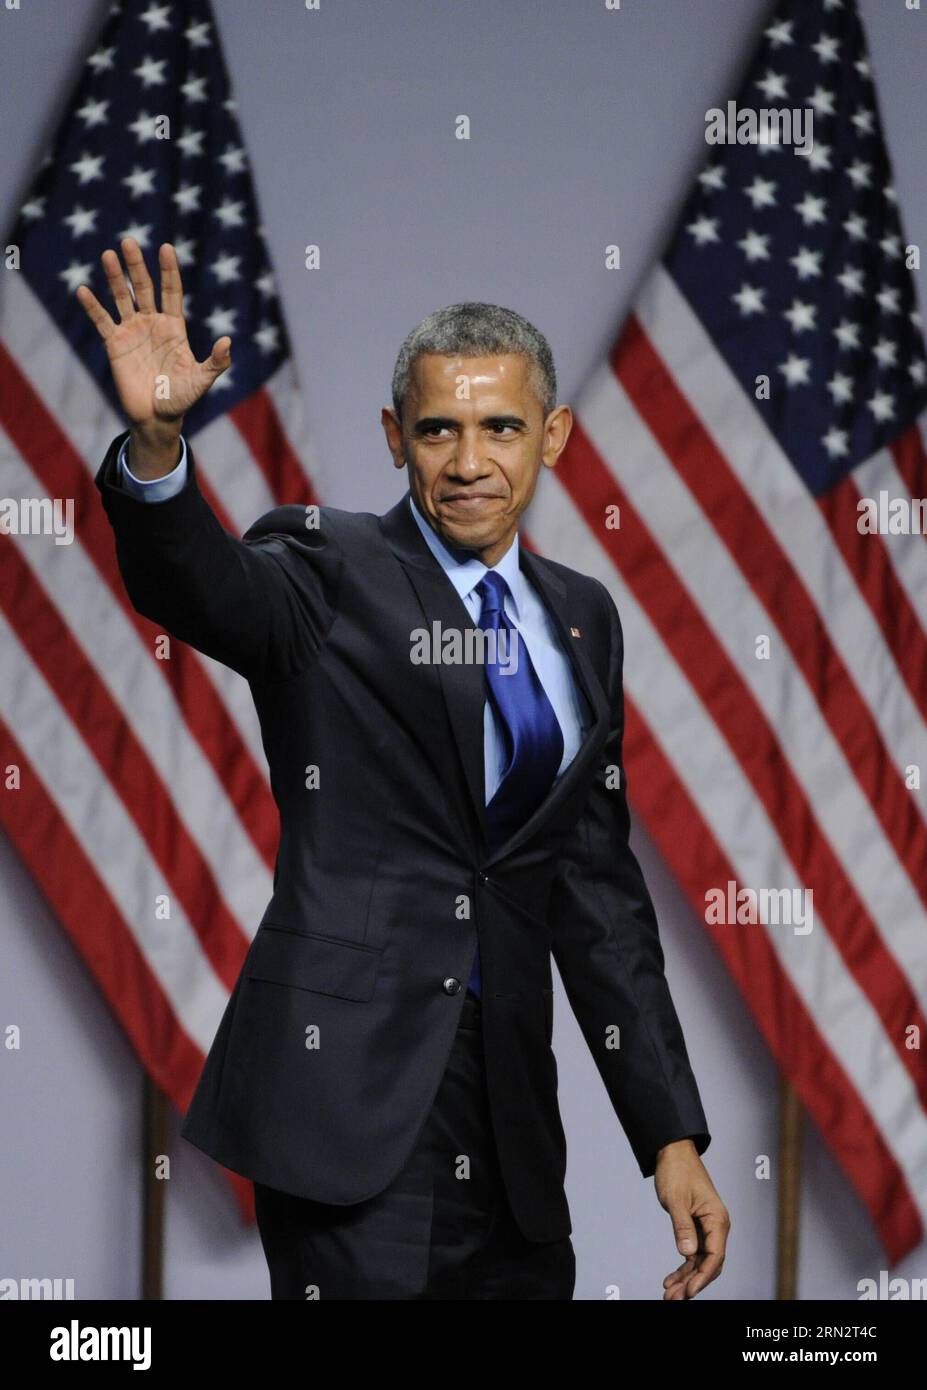 (150323) -- WASHINGTON D.C., March 23, 2015 -- U.S. President Barack Obama greets audiences during the 2015 SelectUSA Investment Summit in Washington D.C., capital of the United States, March 23, 2015. U.S. President Barack Obama on Monday announced a series of new measures to lure more foreign investment and bolster economic recovery. ) U.S.-WASHINGTON D.C.-SELECTUSA-INVESTMENT SUMMIT BaoxDandan PUBLICATIONxNOTxINxCHN   Washington D C March 23 2015 U S President Barack Obama greets audiences during The 2015  Investment Summit in Washington D C Capital of The United States March 23 2015 U S Pr Stock Photo